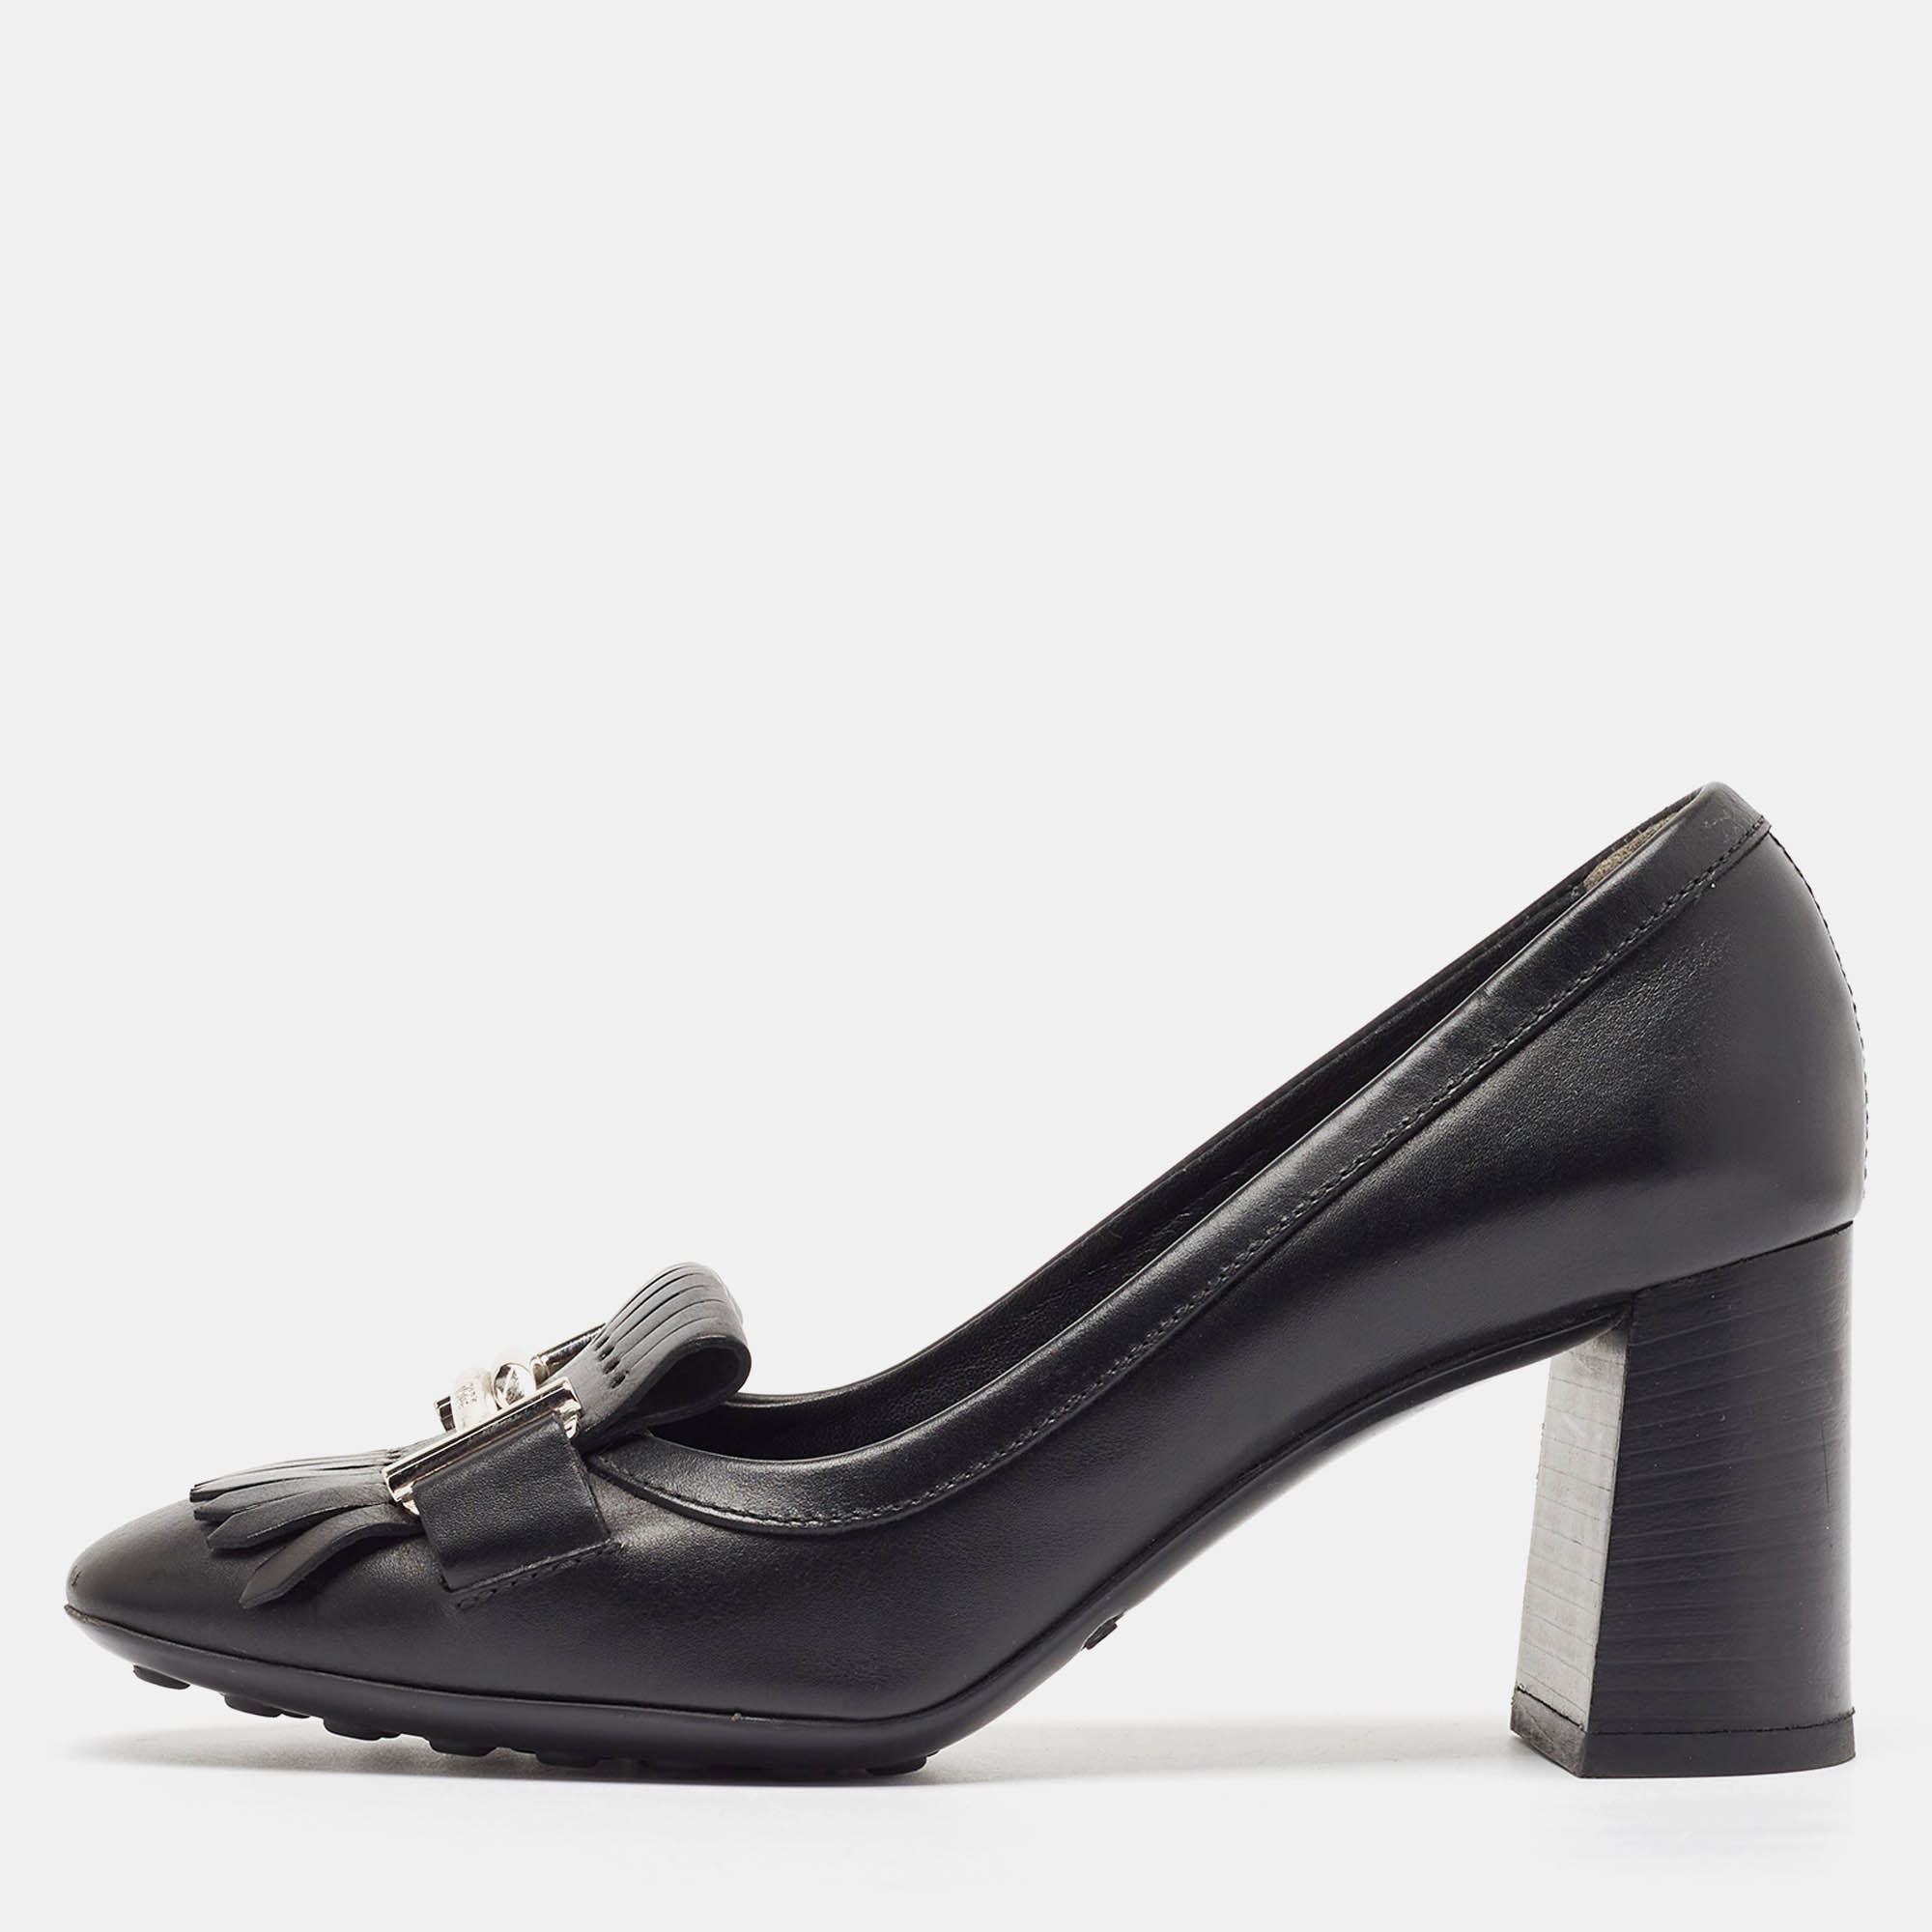 

Tod's Black Leather Double T Buckle Fringed Loafer Pumps Size